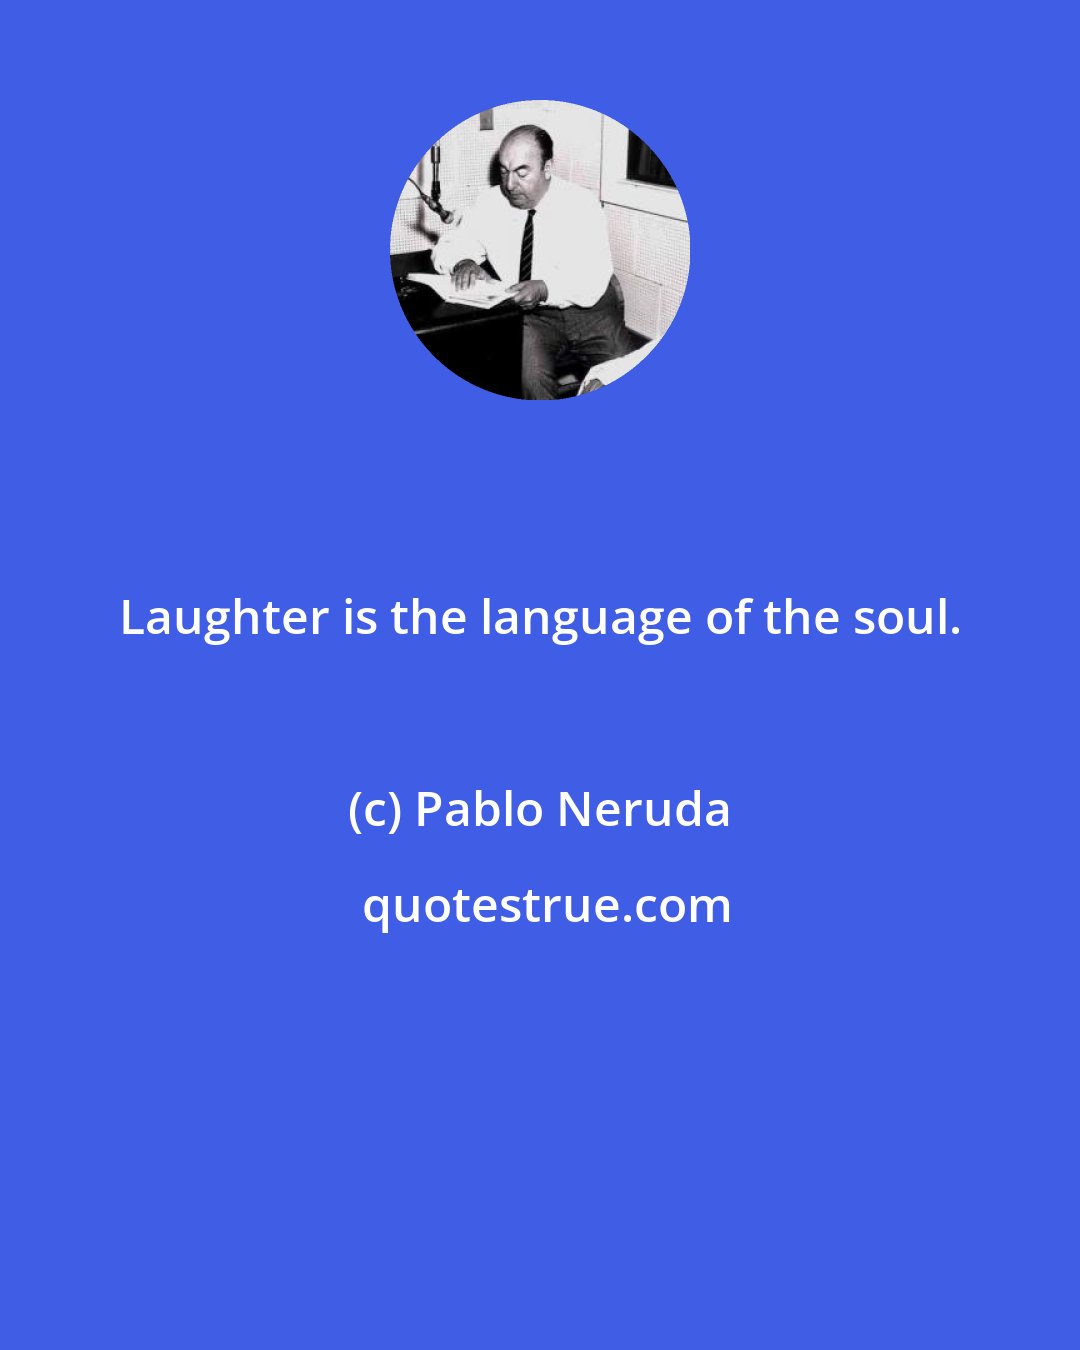 Pablo Neruda: Laughter is the language of the soul.